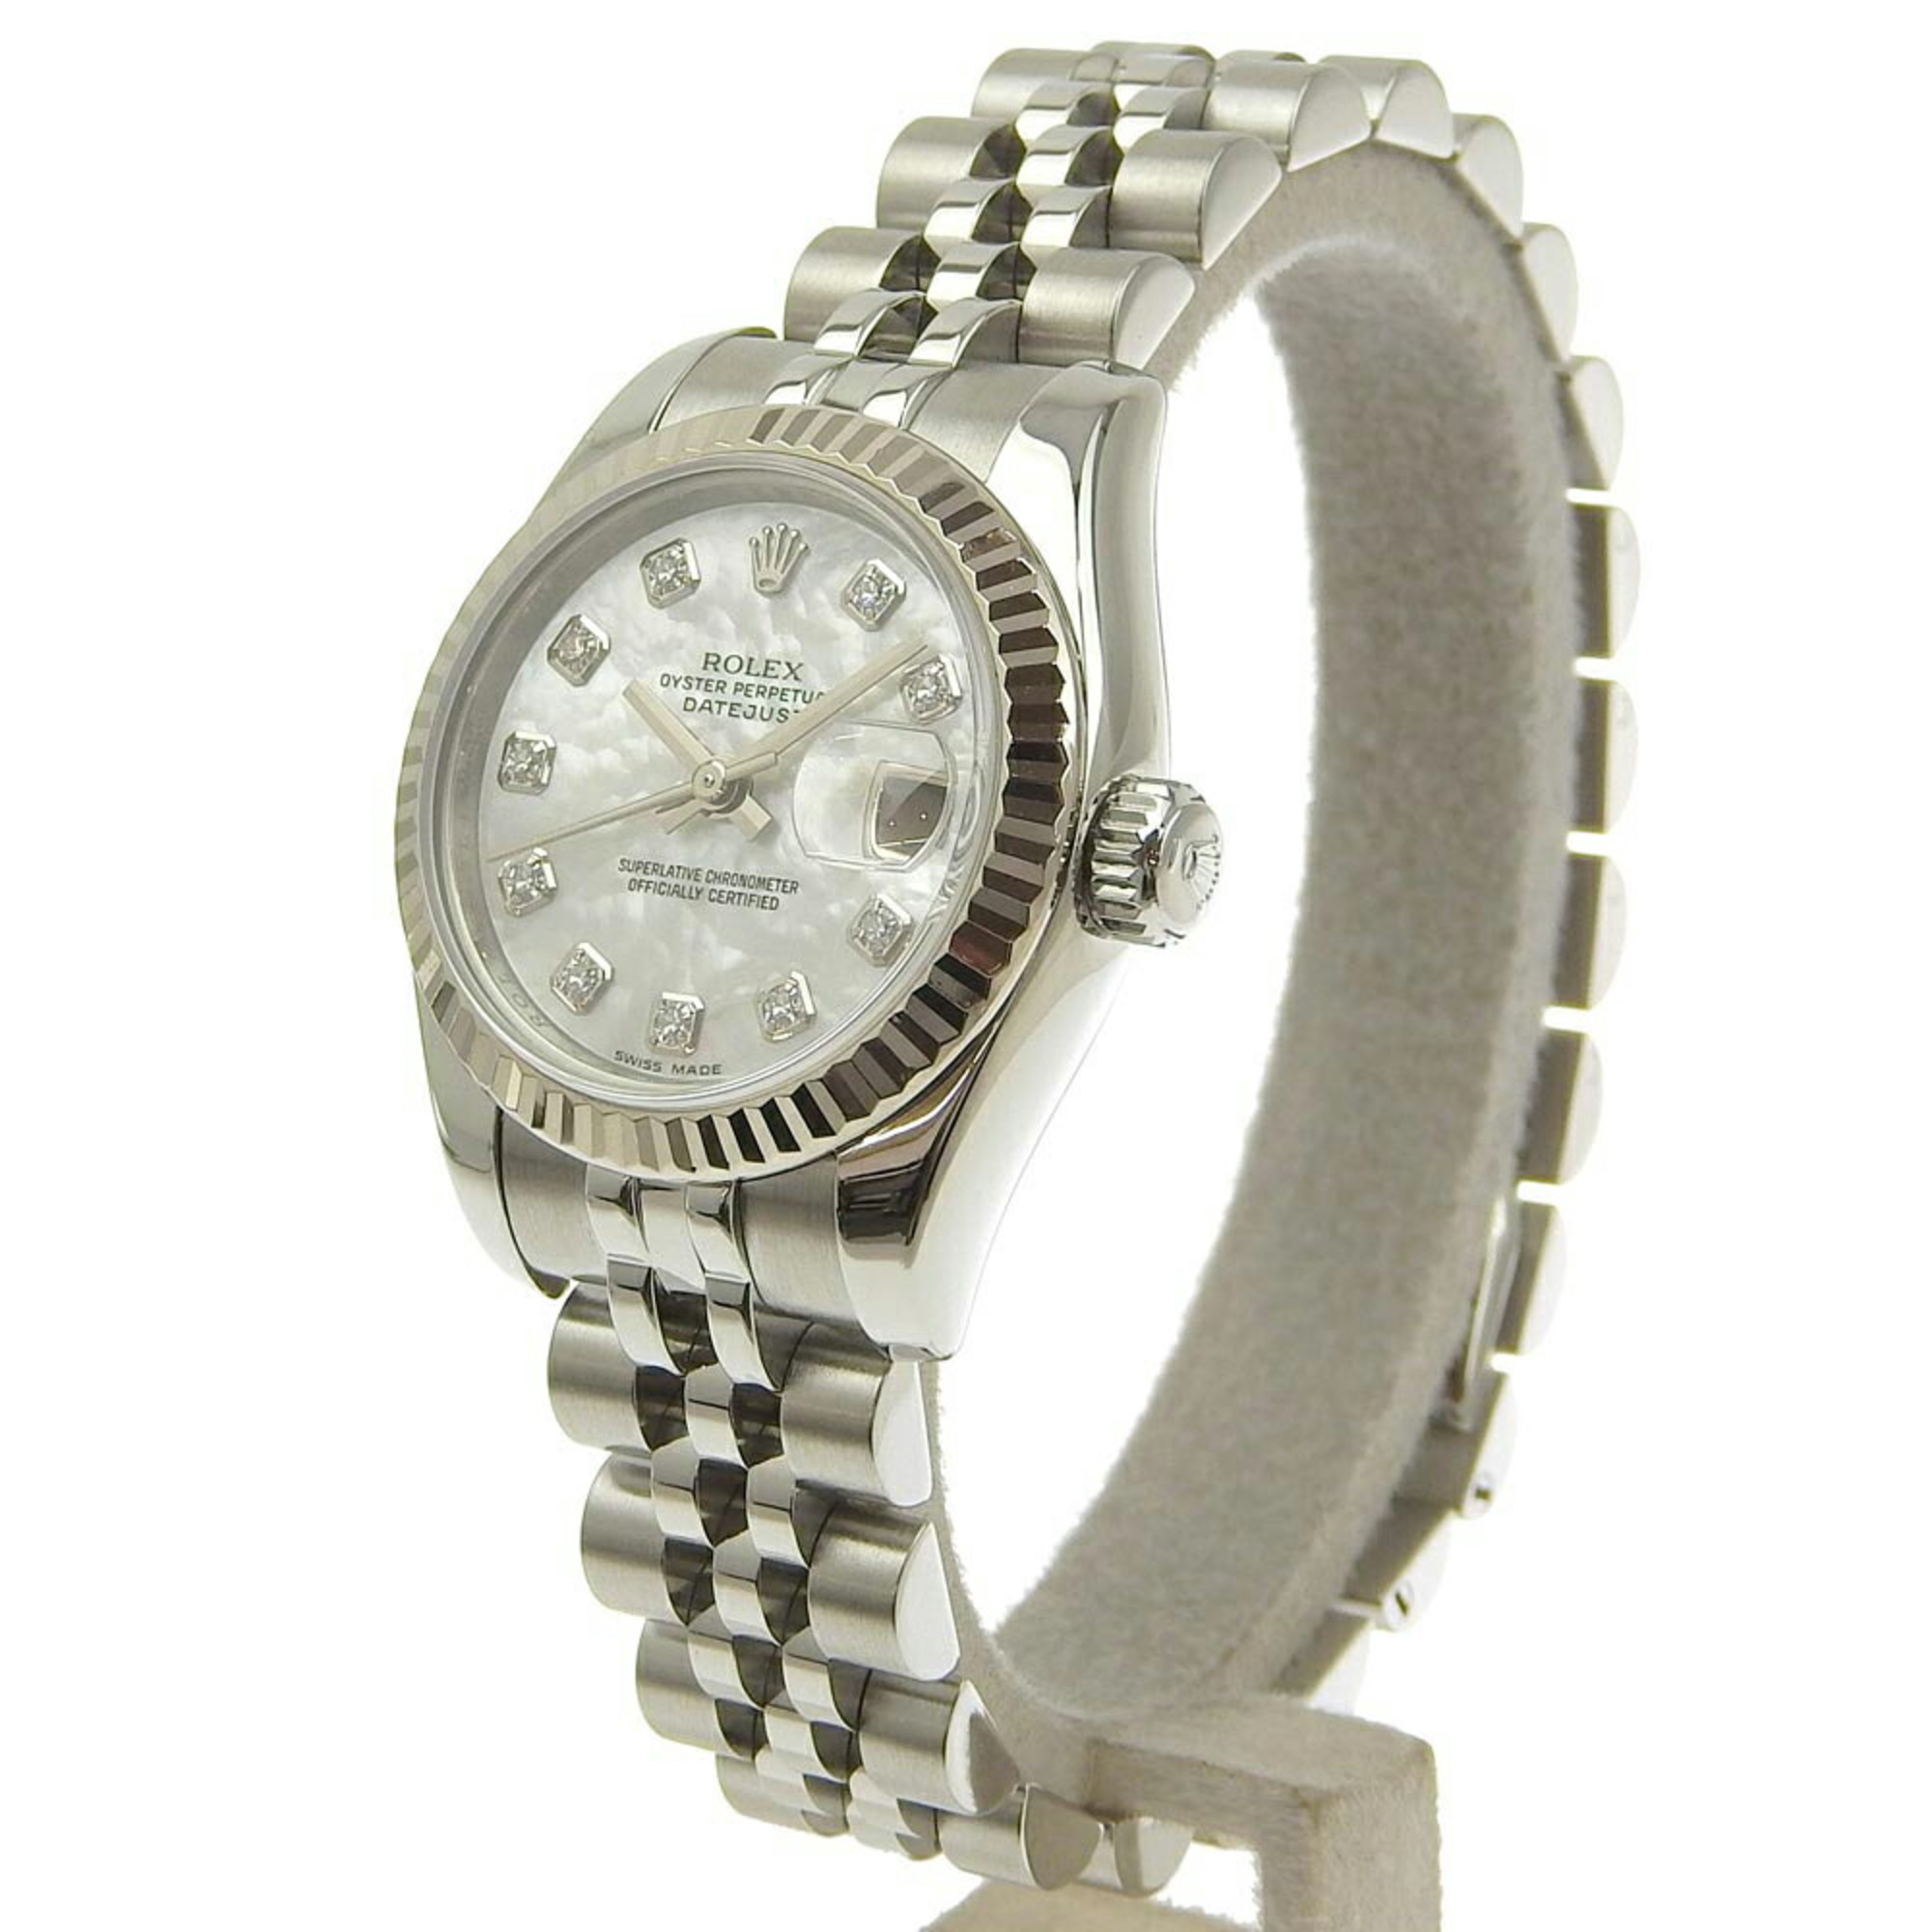 Rolex Datejust Women's Automatic Watch White Shell Dial 8P Diamond 179174G V Number